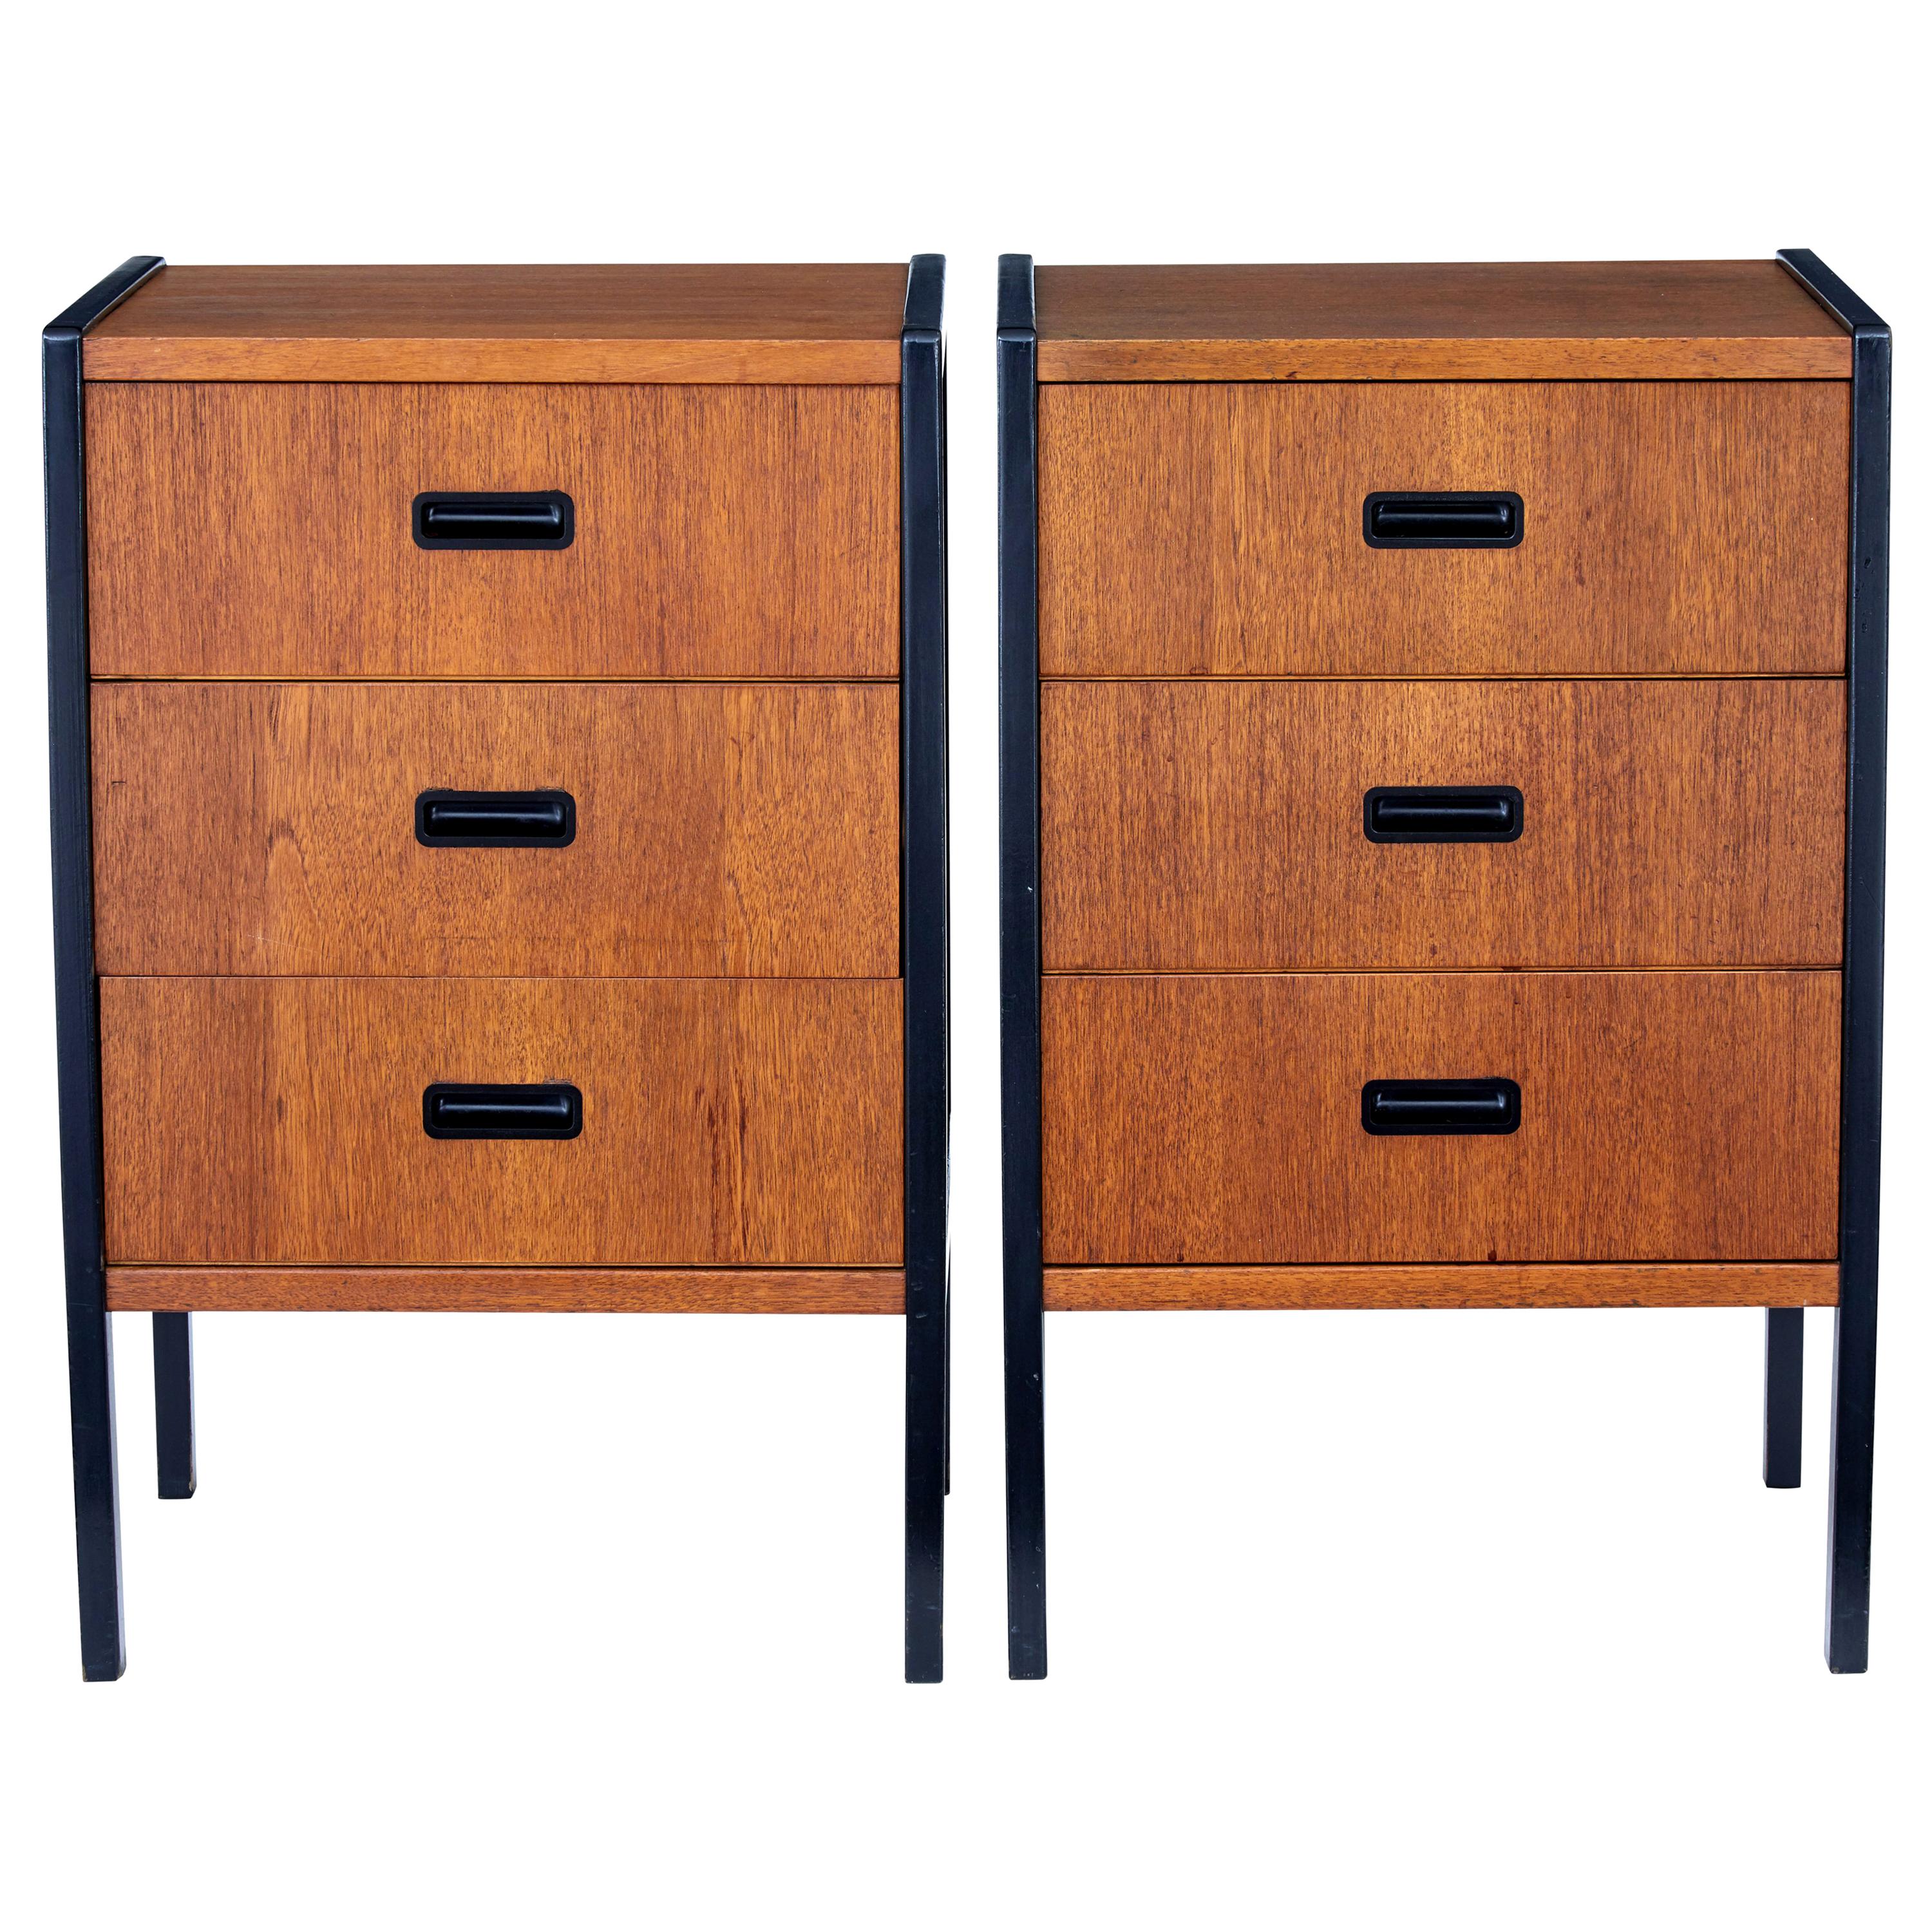 Pair of Mid-20th Century Scandinavian Teak Bedside Chests by Bodafors